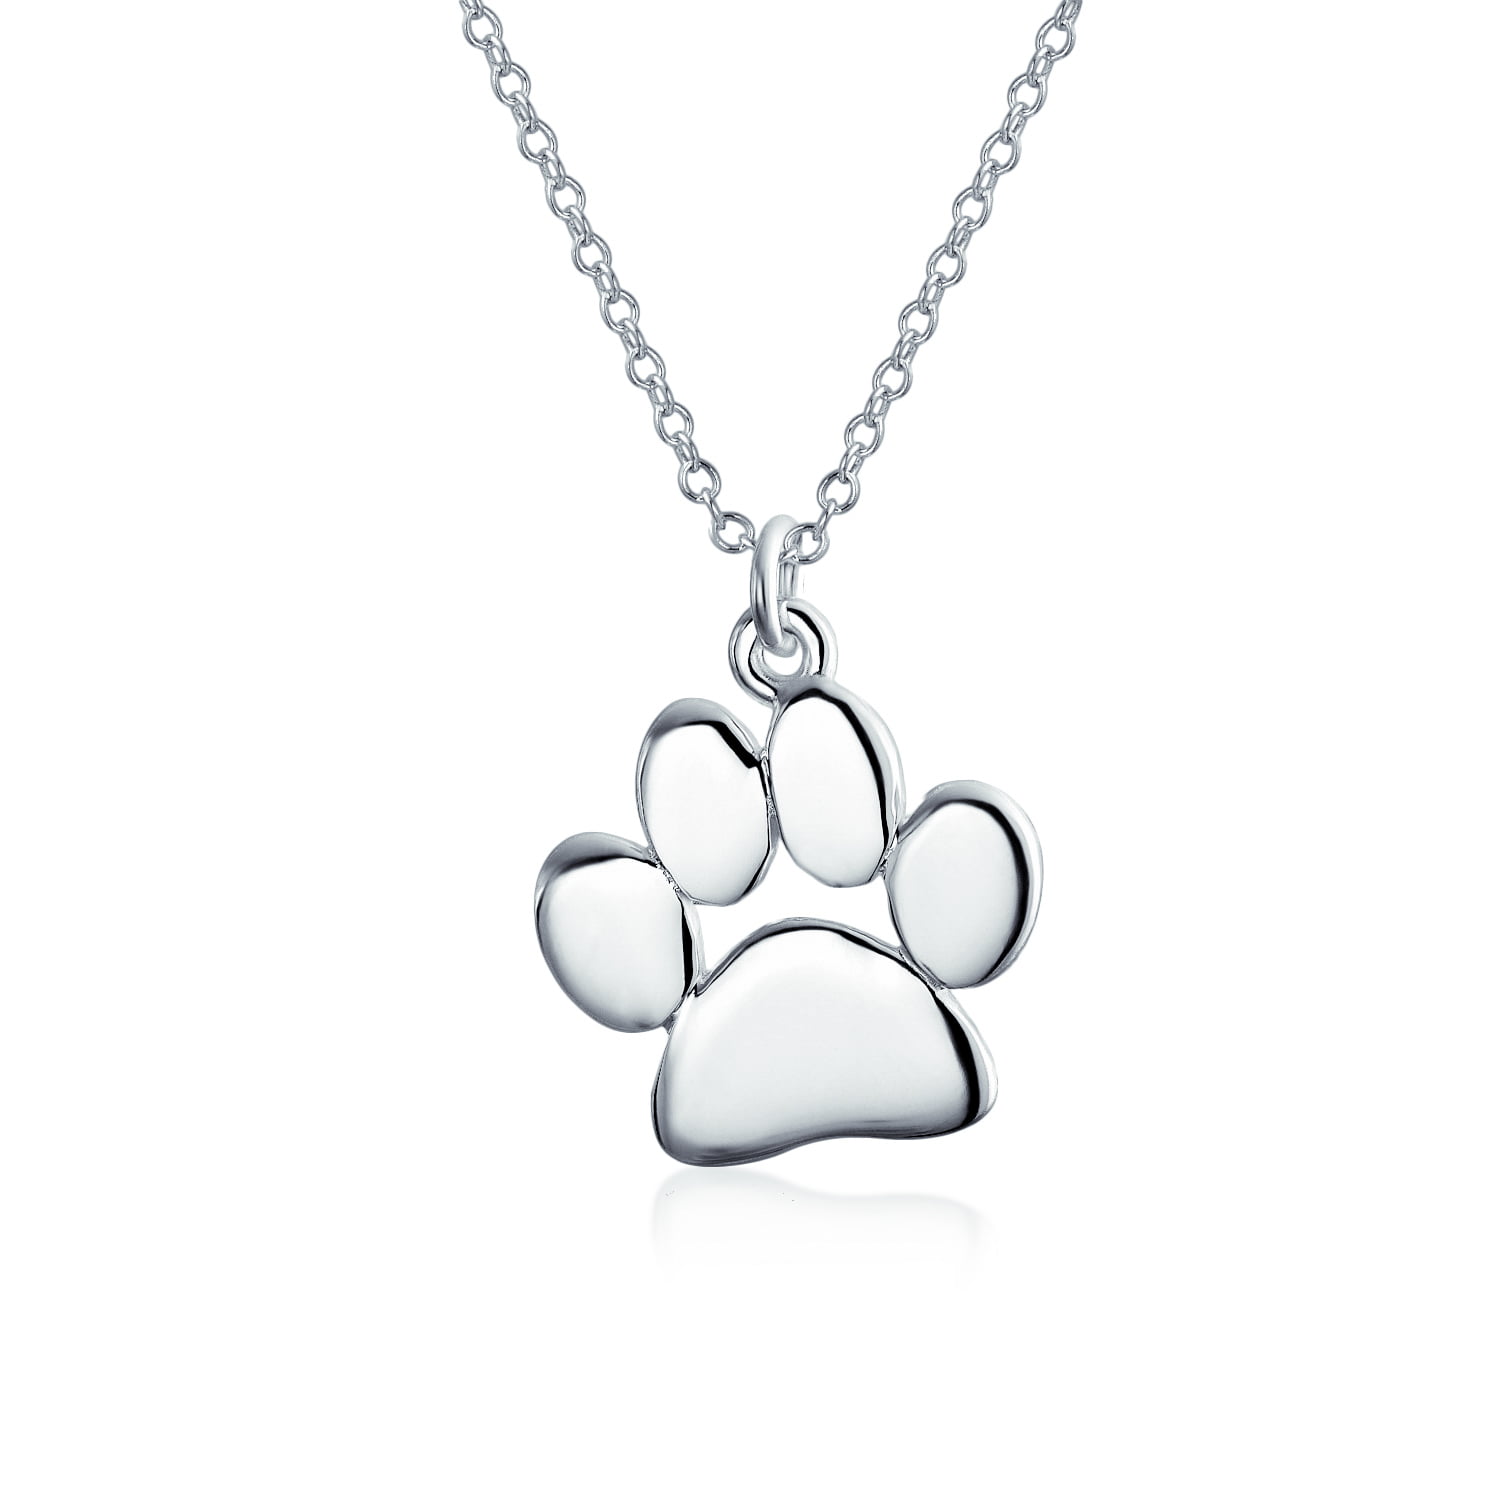 Lover Dog Pet Heartbeat Necklace for Women Girls and Teens Dog Paw and Heartbeat Necklace 18k Solid Yellow Gold